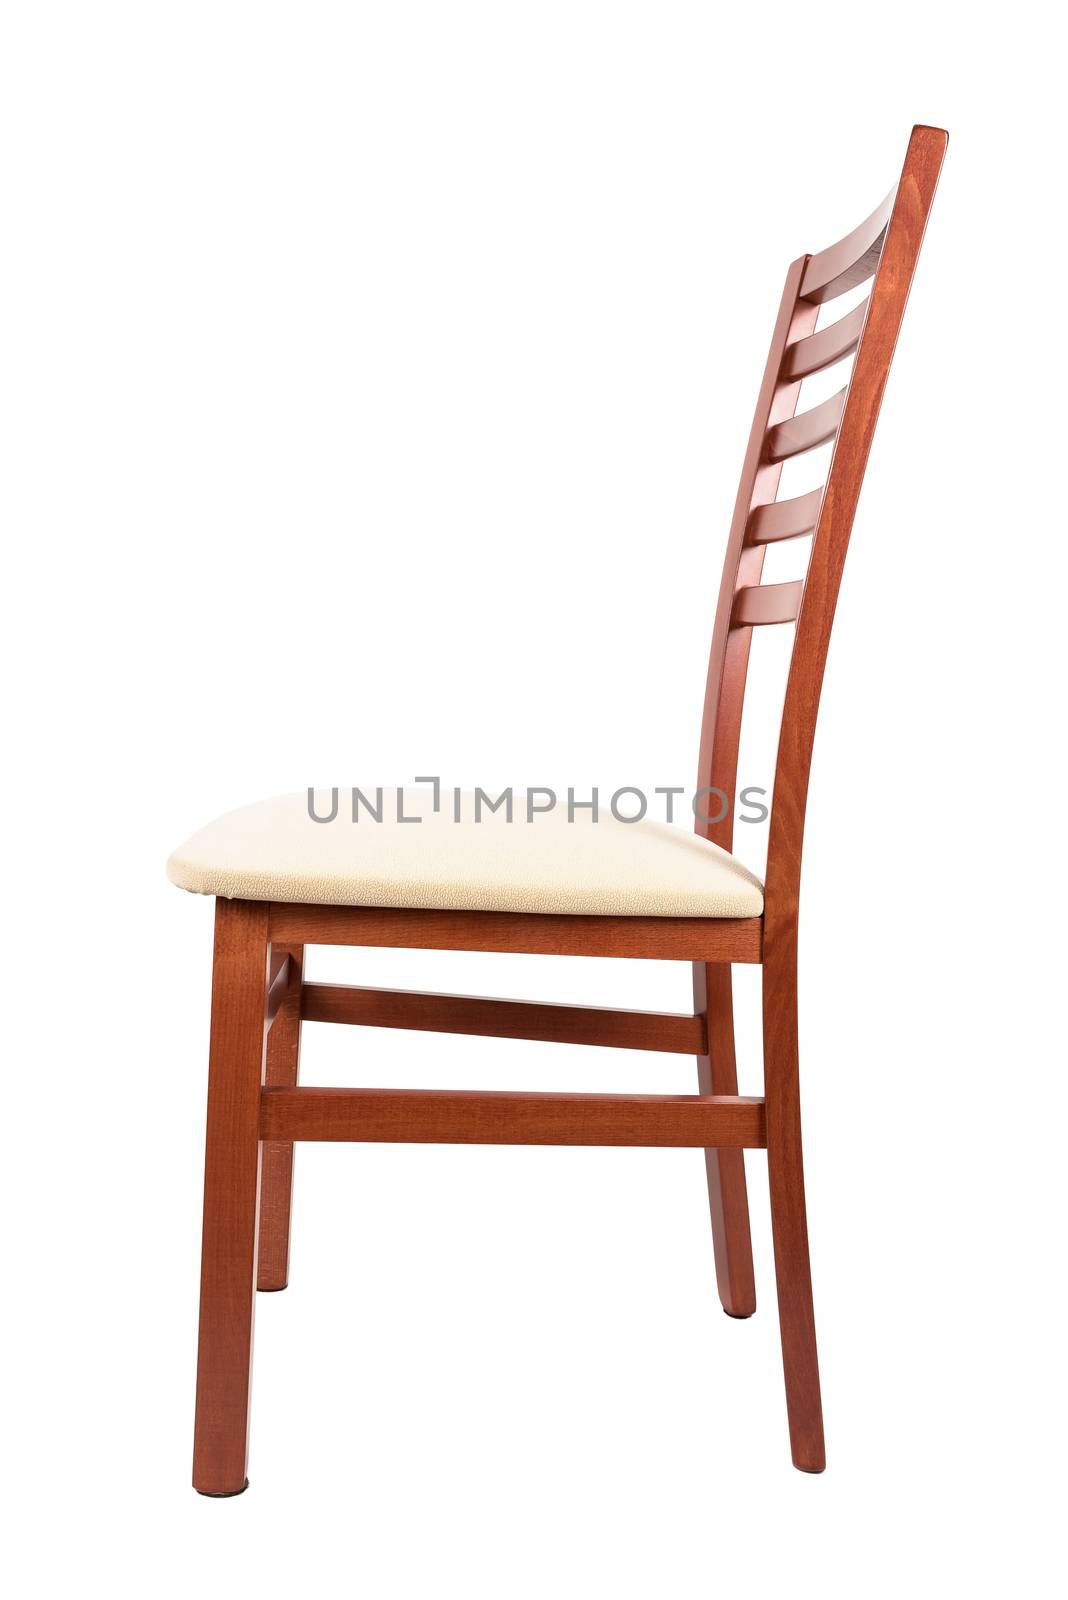 Wooden chair on white background by mkos83